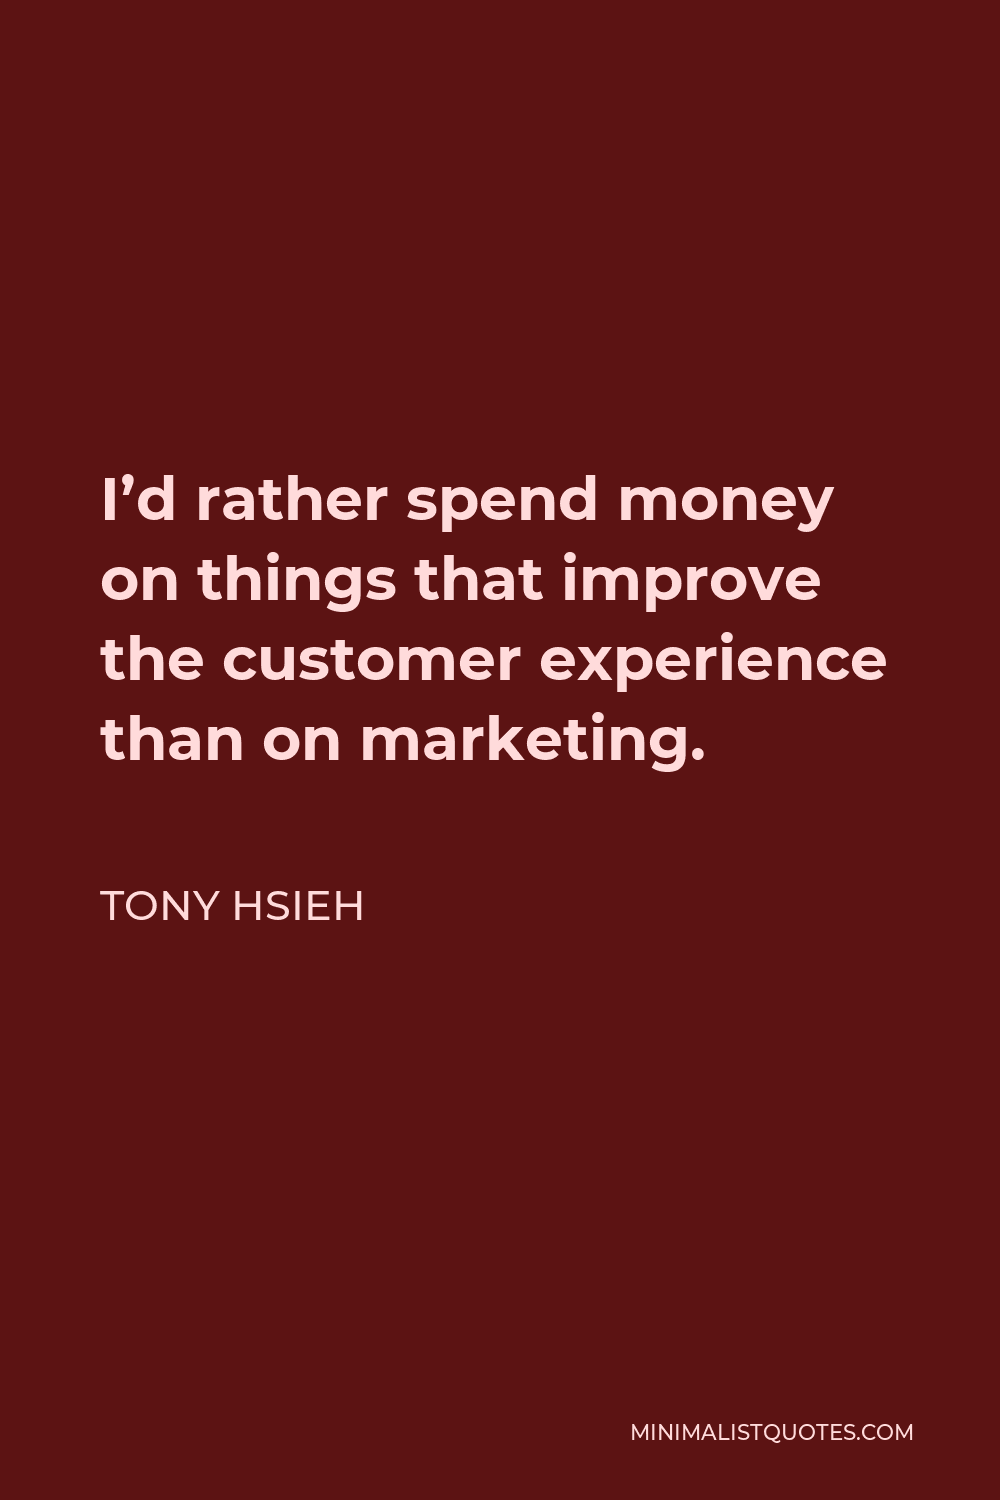 Tony Hsieh Quote - I’d rather spend money on things that improve the customer experience than on marketing.